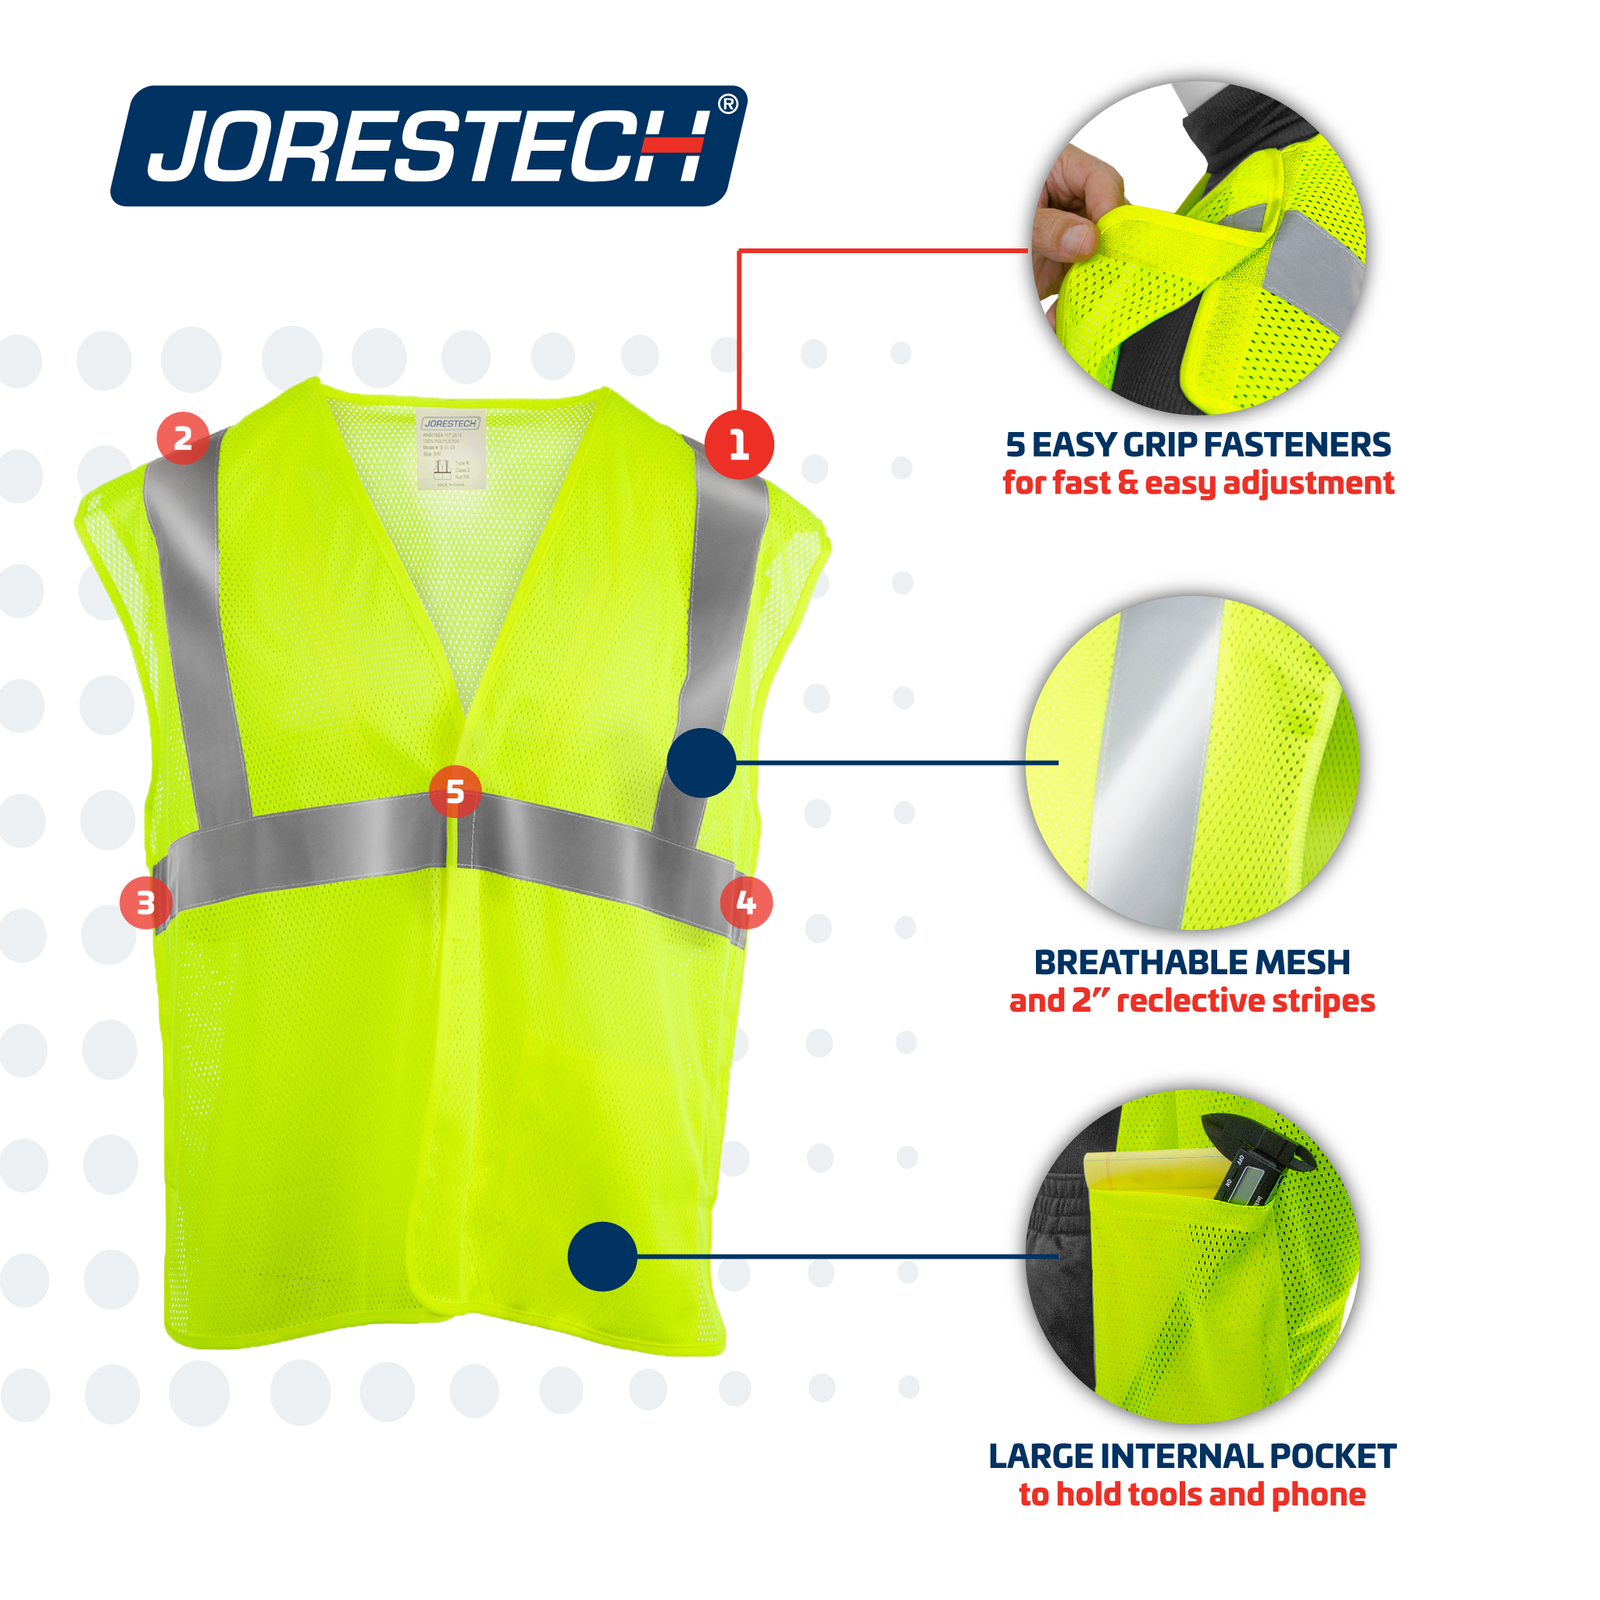 Lime JORESTECH hi visibility mesh tearaway safety vest with easy fasteners, breathable mesh and integrated pocket